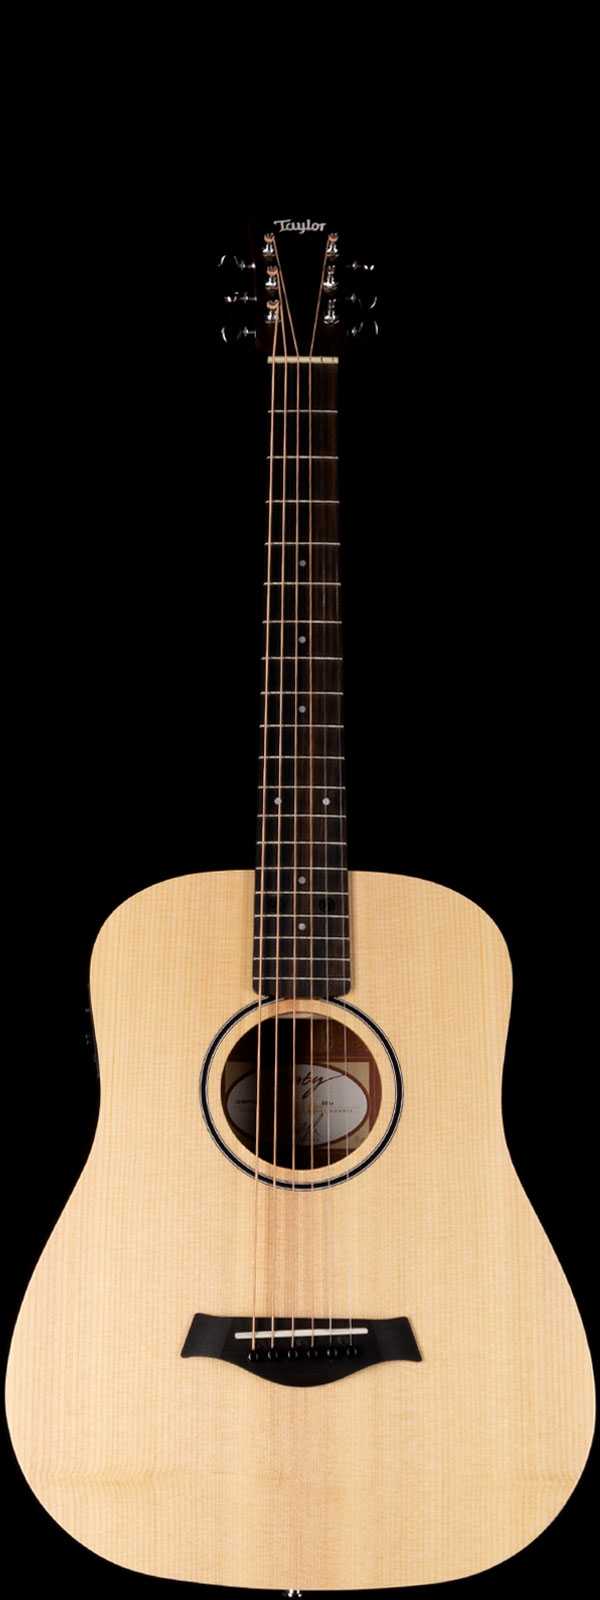 Taylor Baby Taylor BT1e Acoustic-Electric Sitka Spruce Top Natural